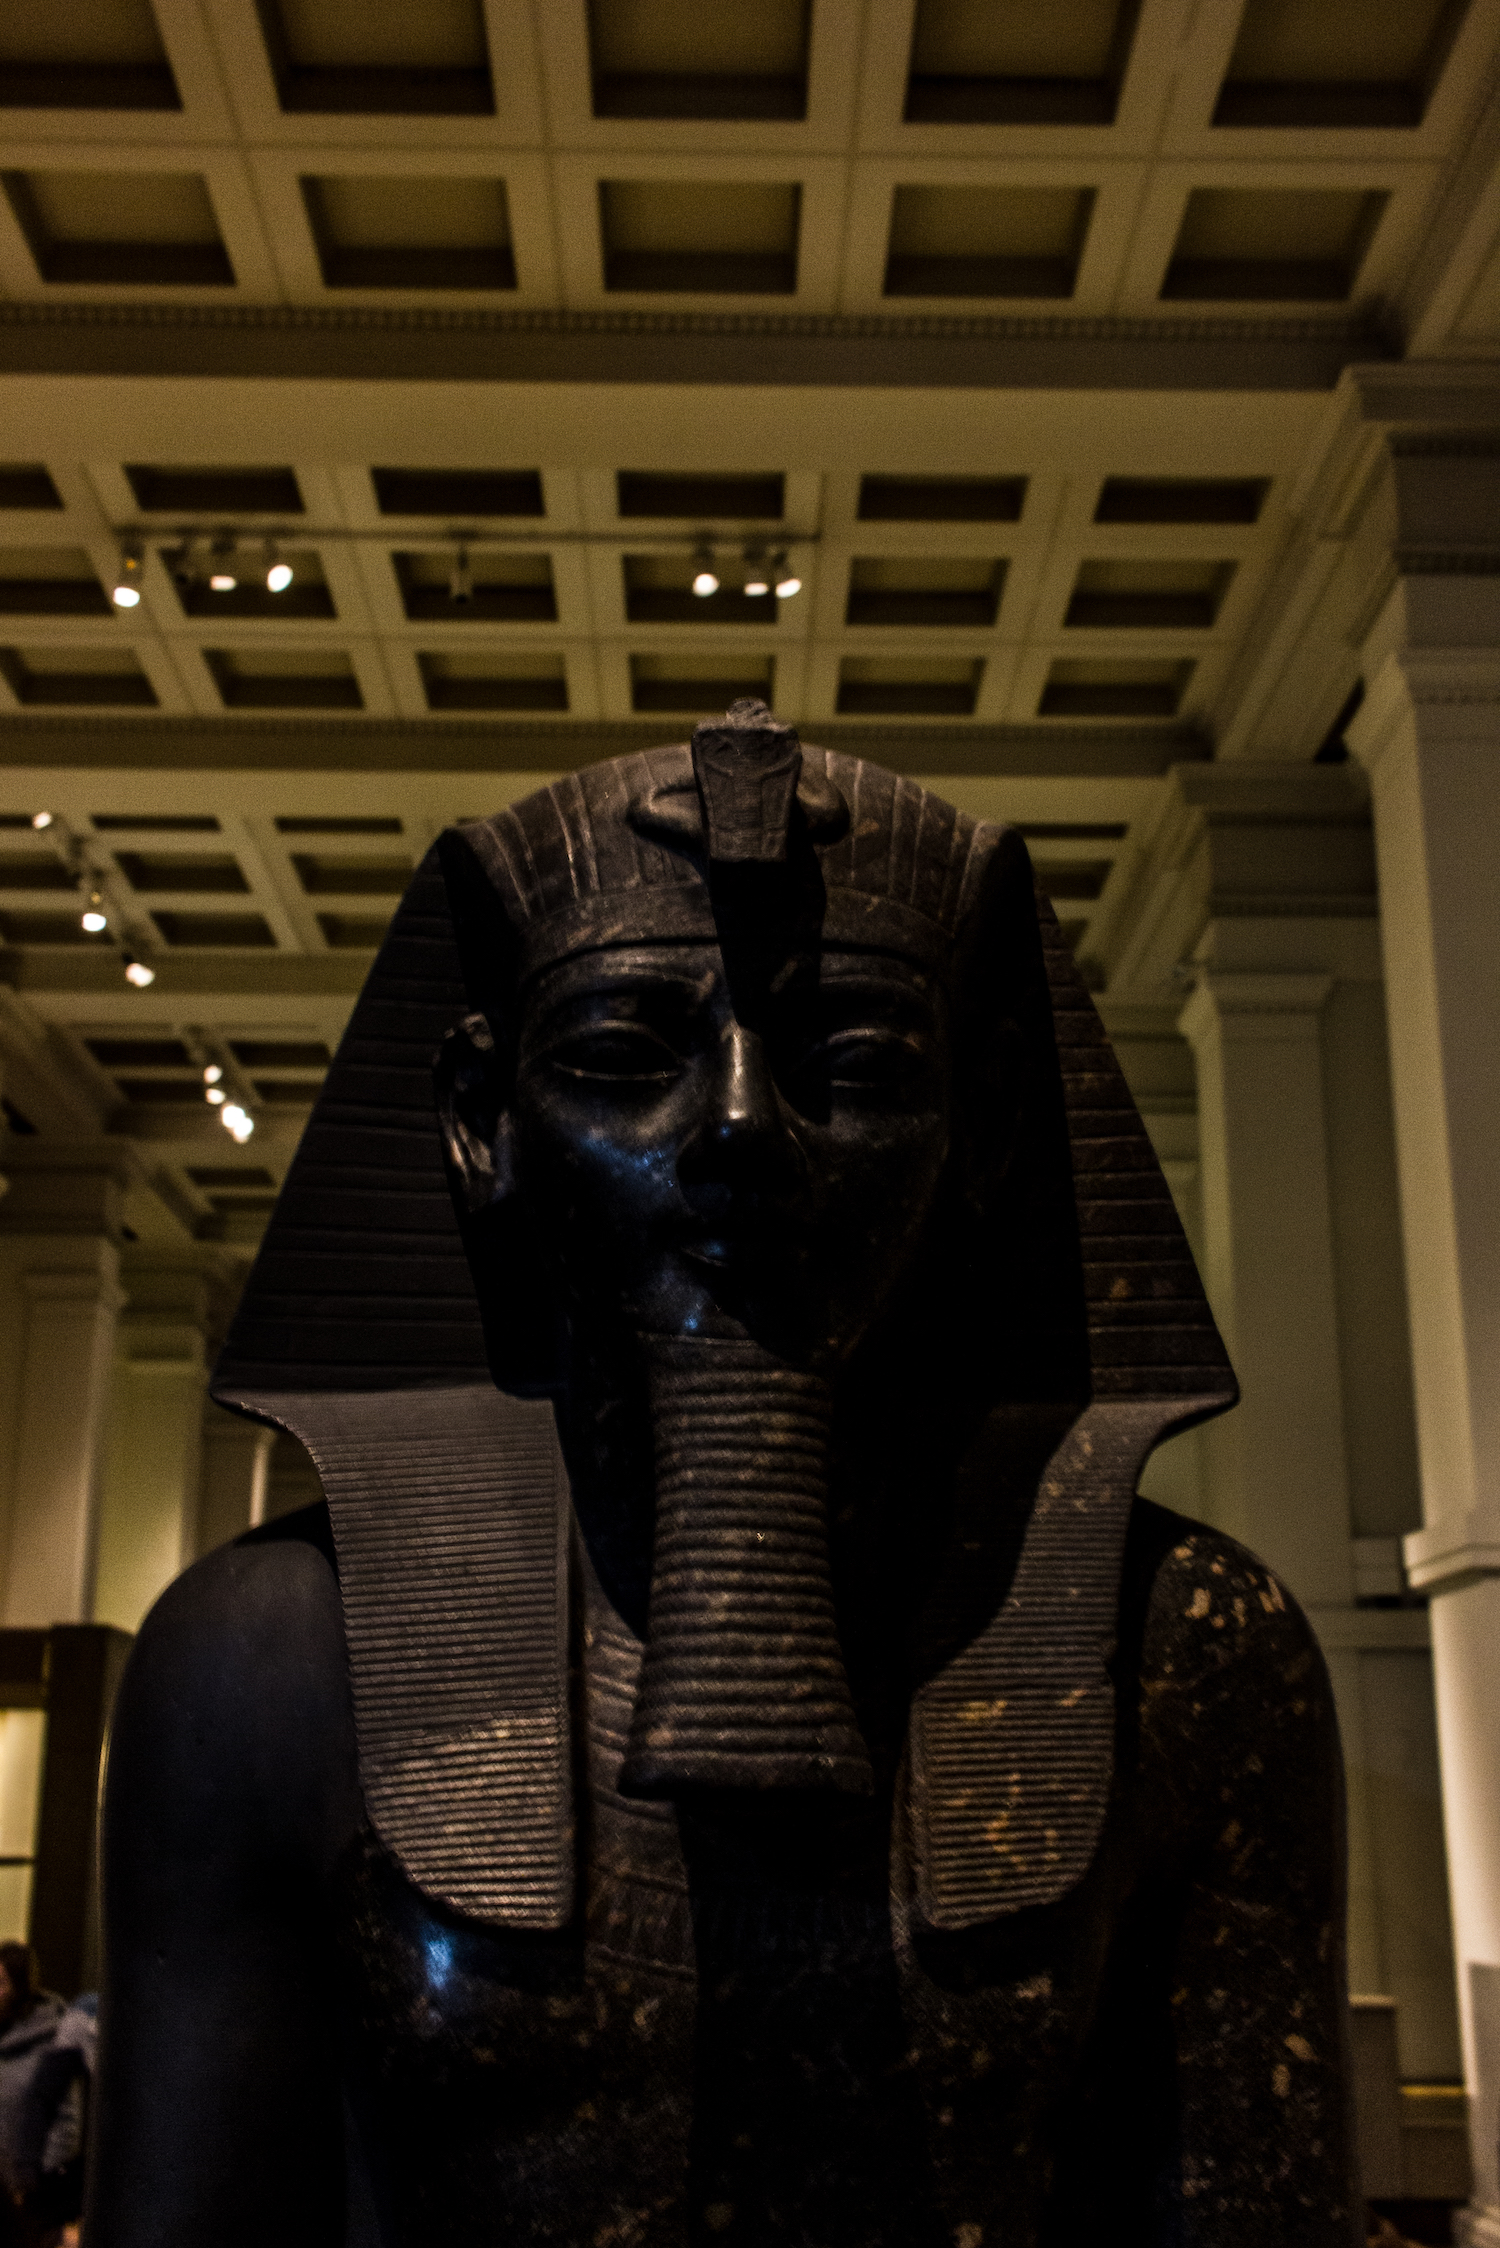 Professional Photography Stone Sculpture From Kemet Egypt Of King Amenophis III In British Museum London